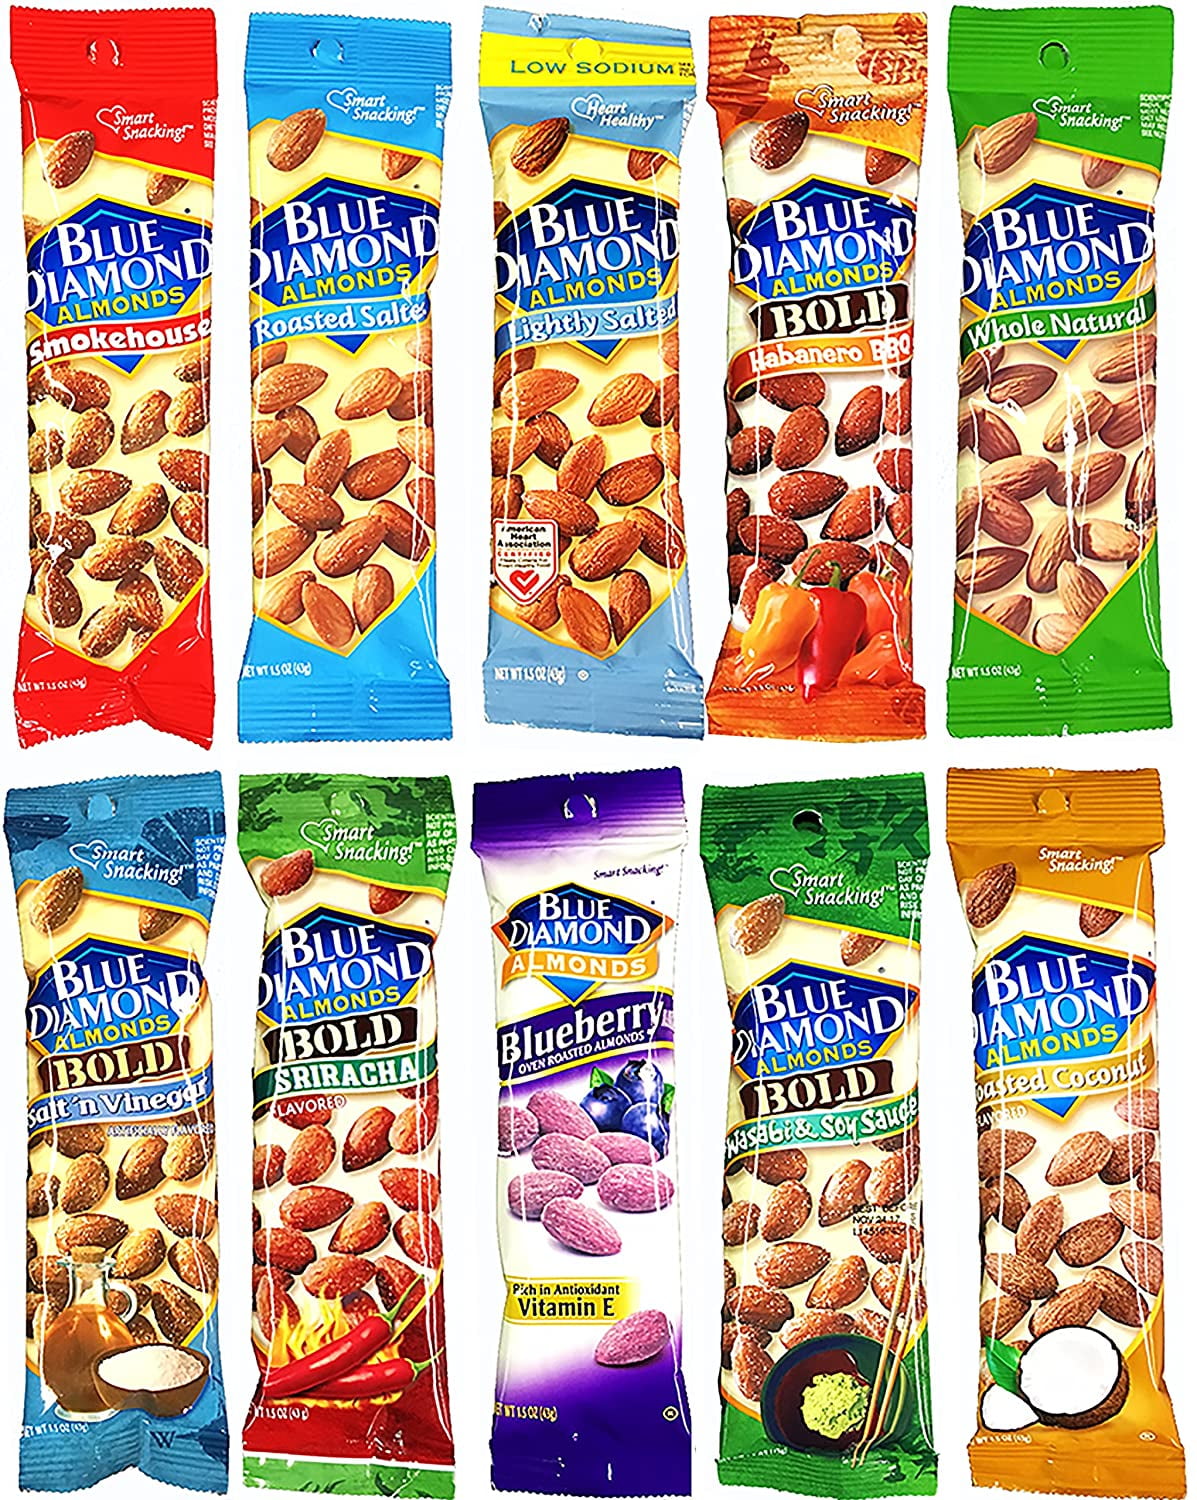 Blue Variety Pack (1.5 Ounce Bags) Pack) - Walmart.com